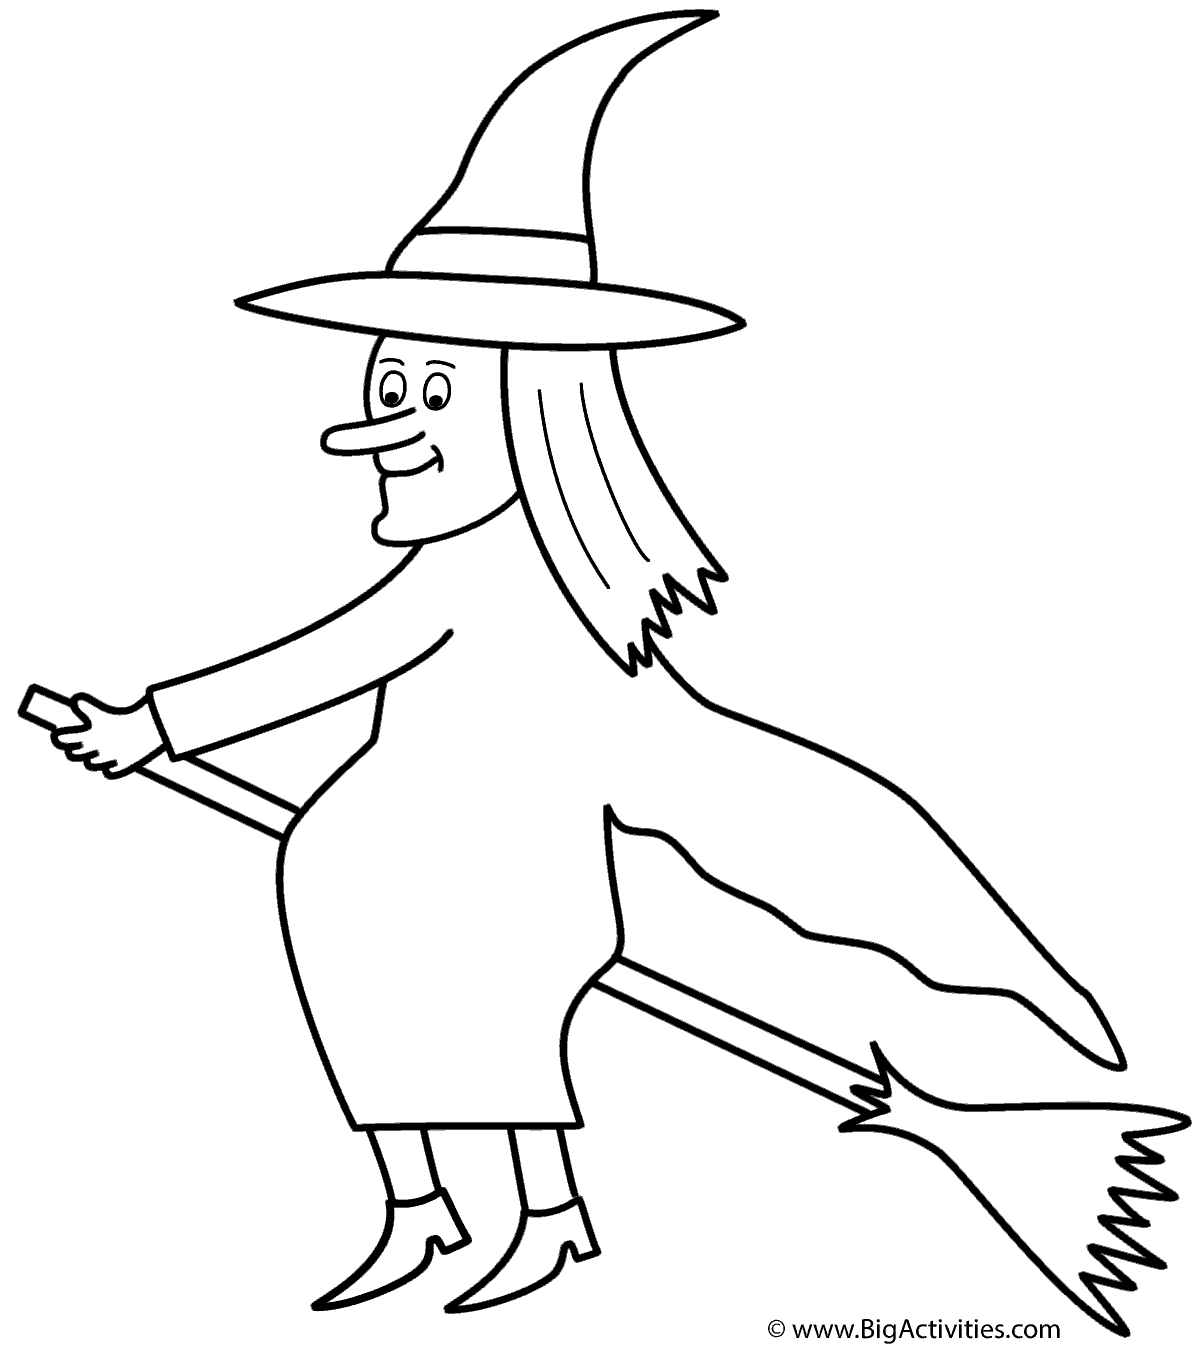 Witch on broom Coloring Page Halloween